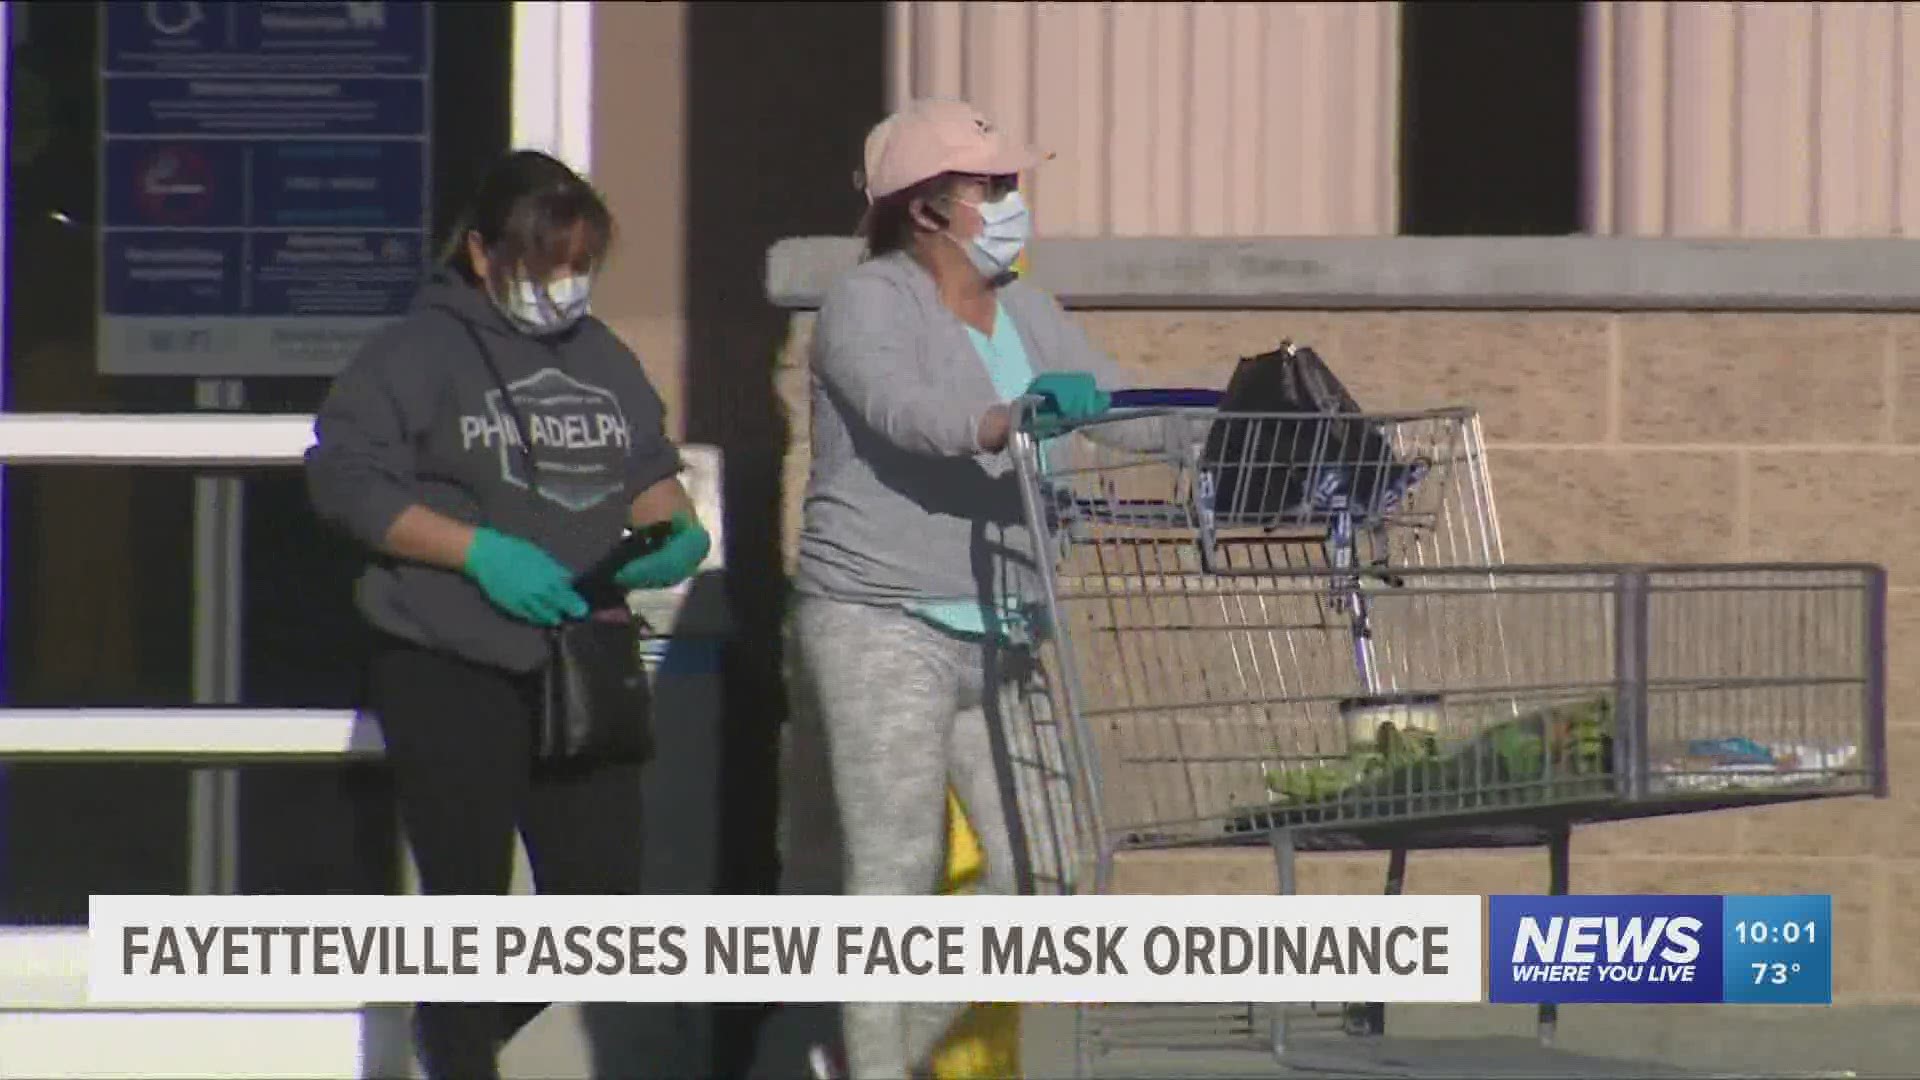 Fayetteville City Council passes new face mask ordinance